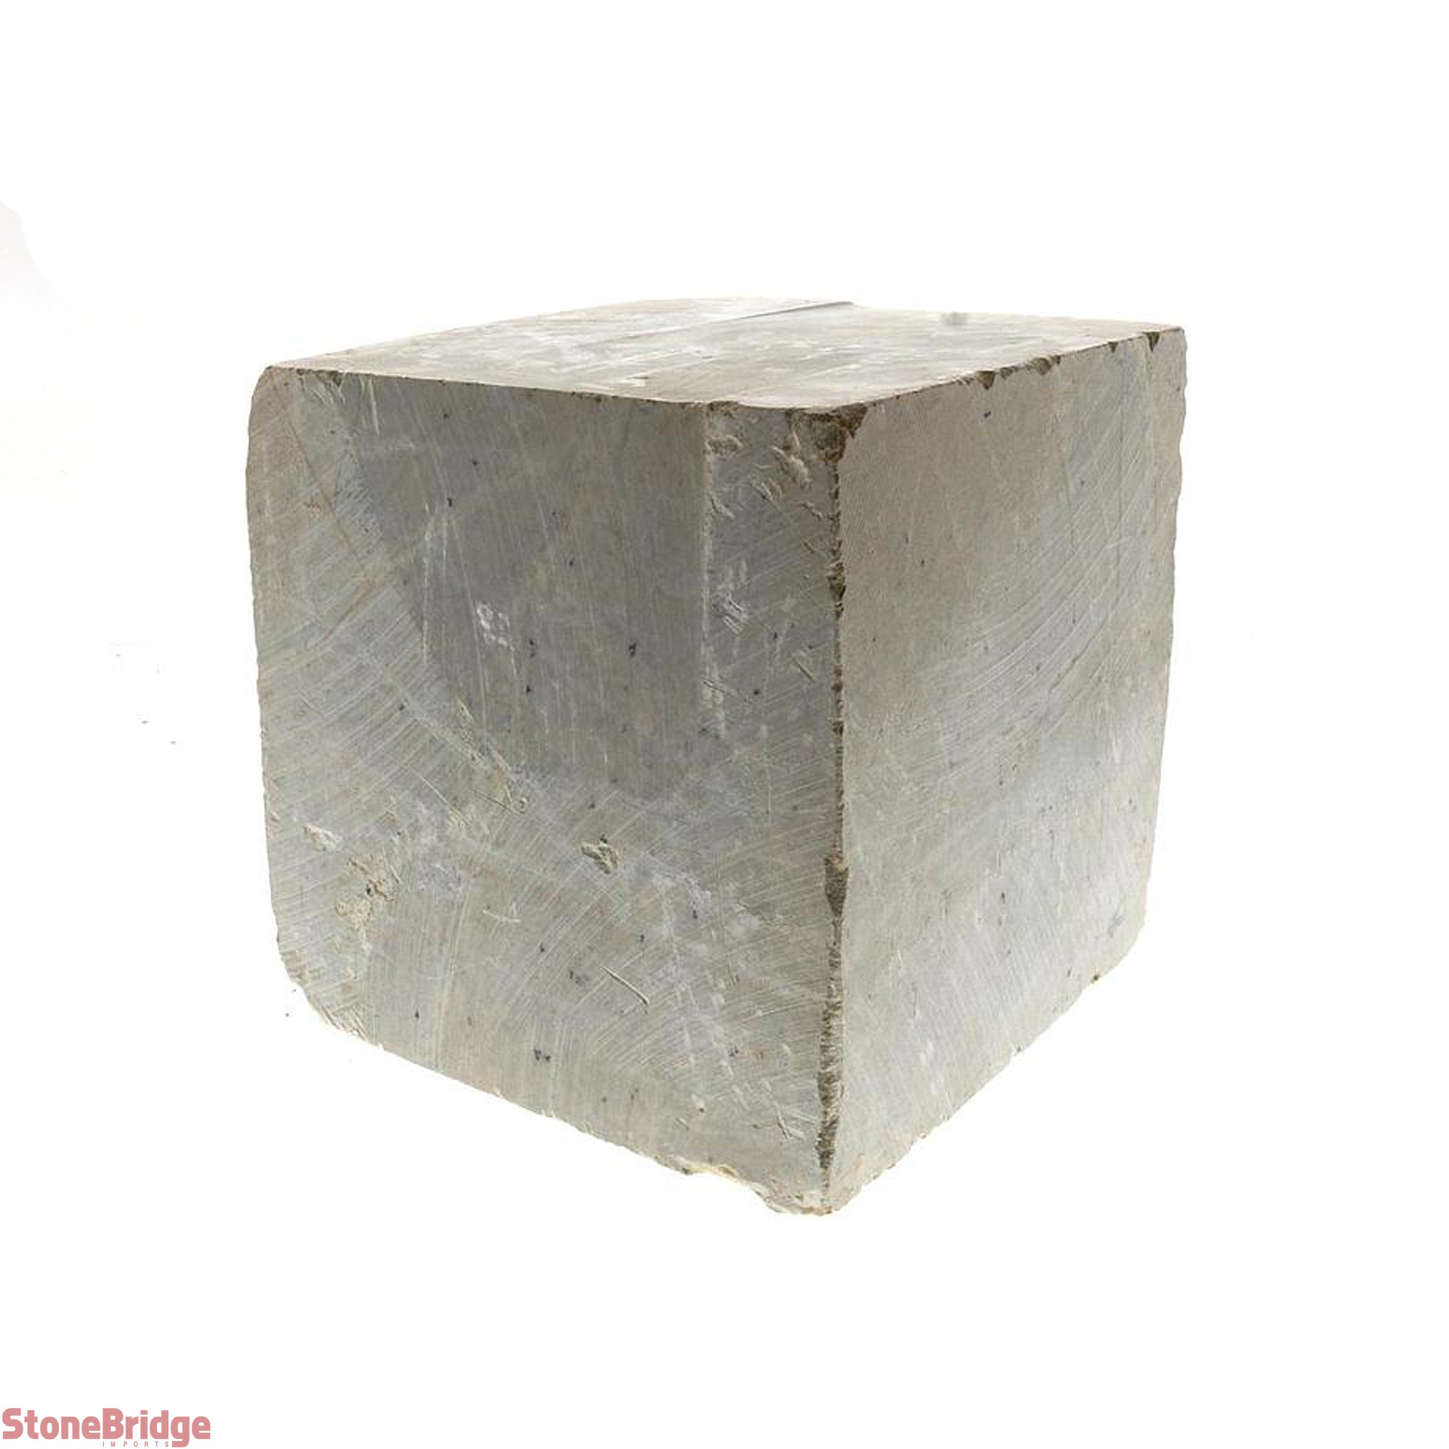 8lb Soapstone Block for Carving